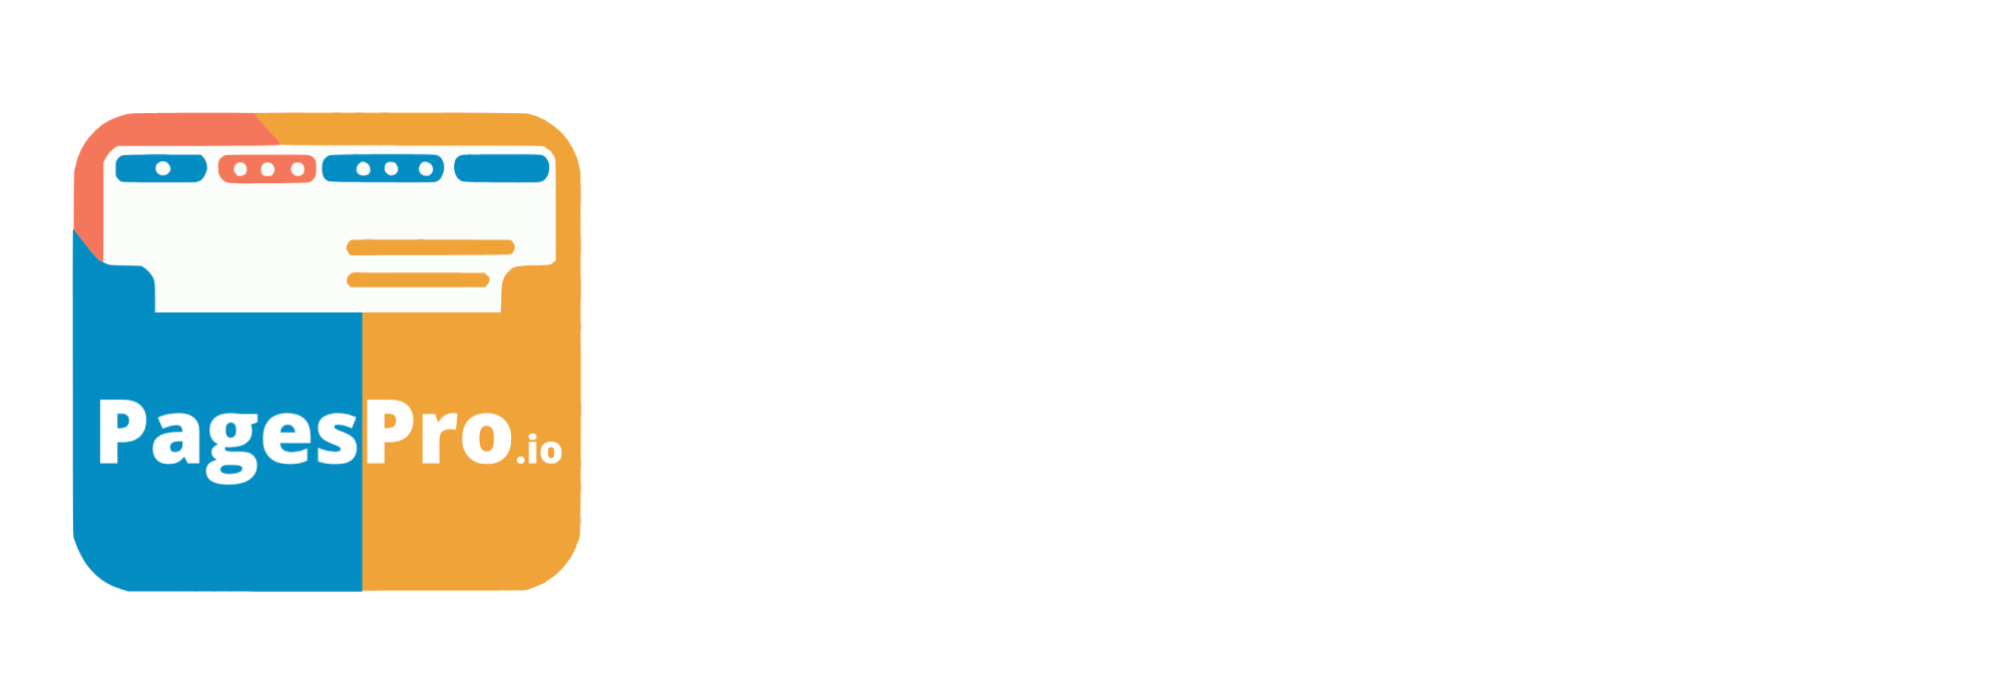 Pages Pro